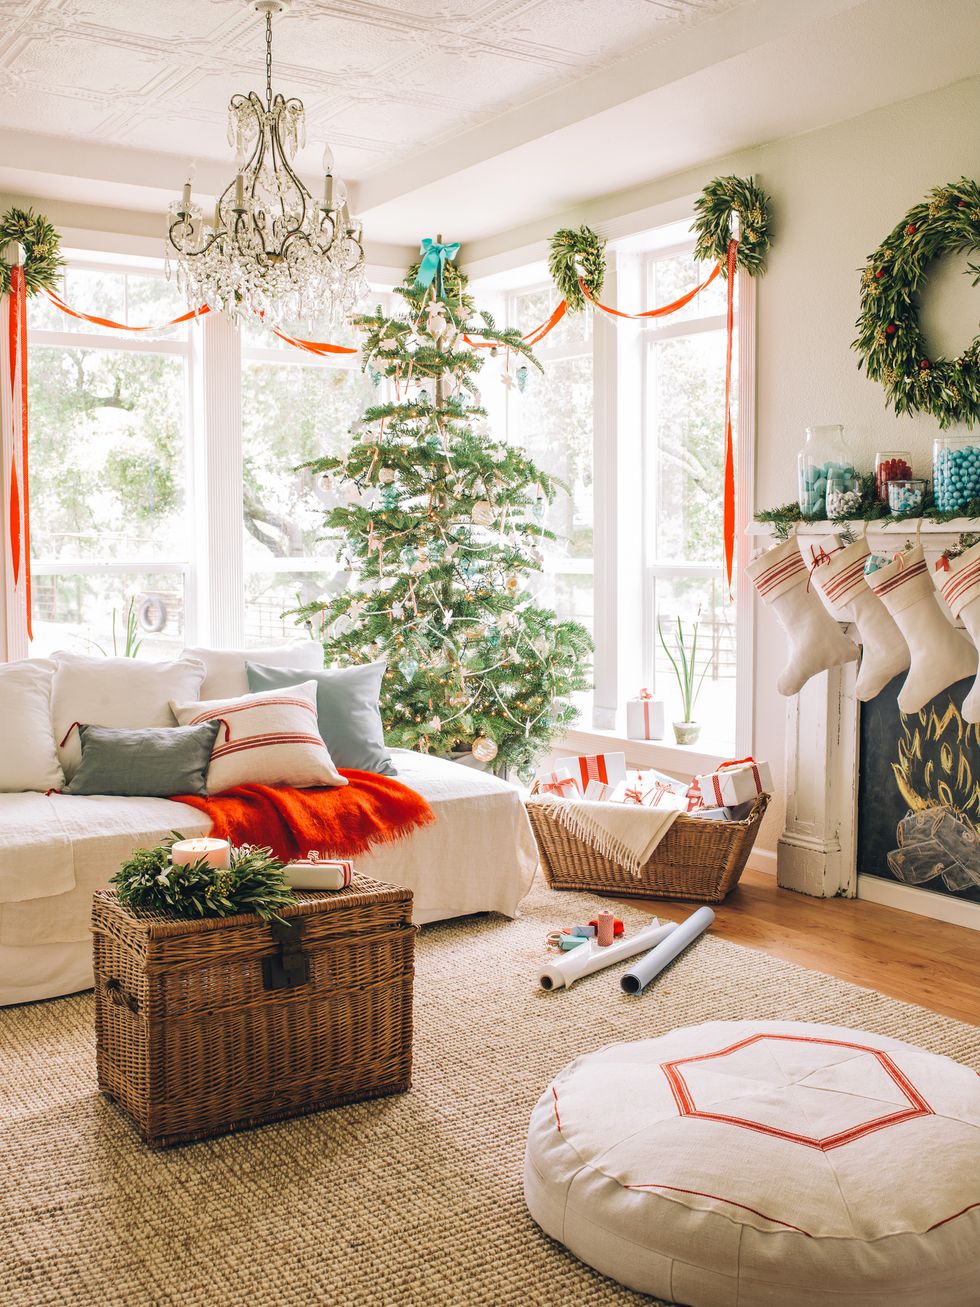 35 Wonderful Christmas Window Display Ideas On A Budget, Home Design And  Interior